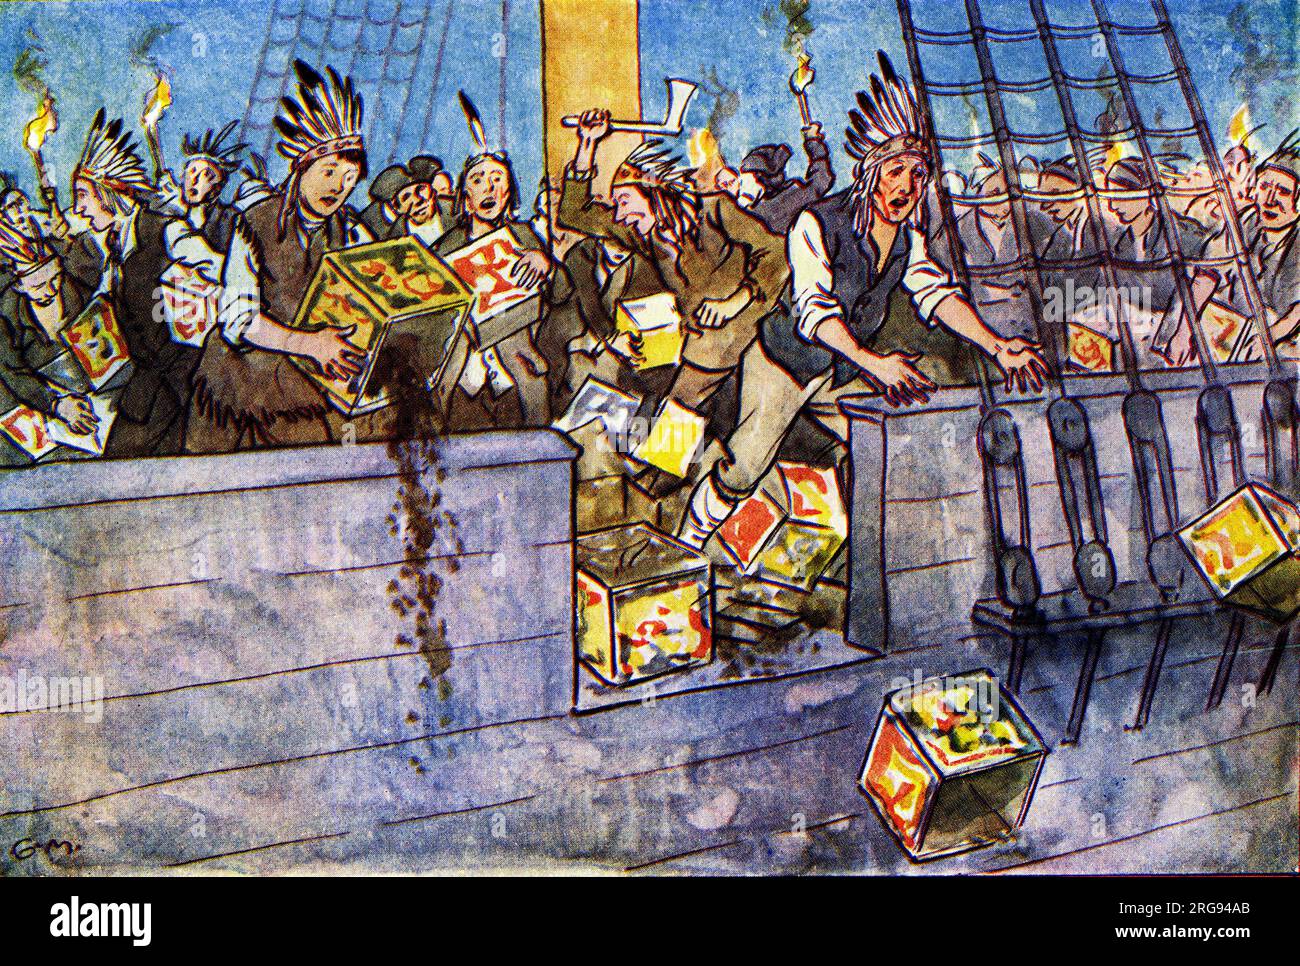 The Boston Tea Party - a political and mercantile protest by the Sons of Liberty in Boston, Massachusetts, on December 16, 1773. Demonstrators, some disguised as Native Americans, destroyed an entire shipment of tea sent by the East India Company. Stock Photo